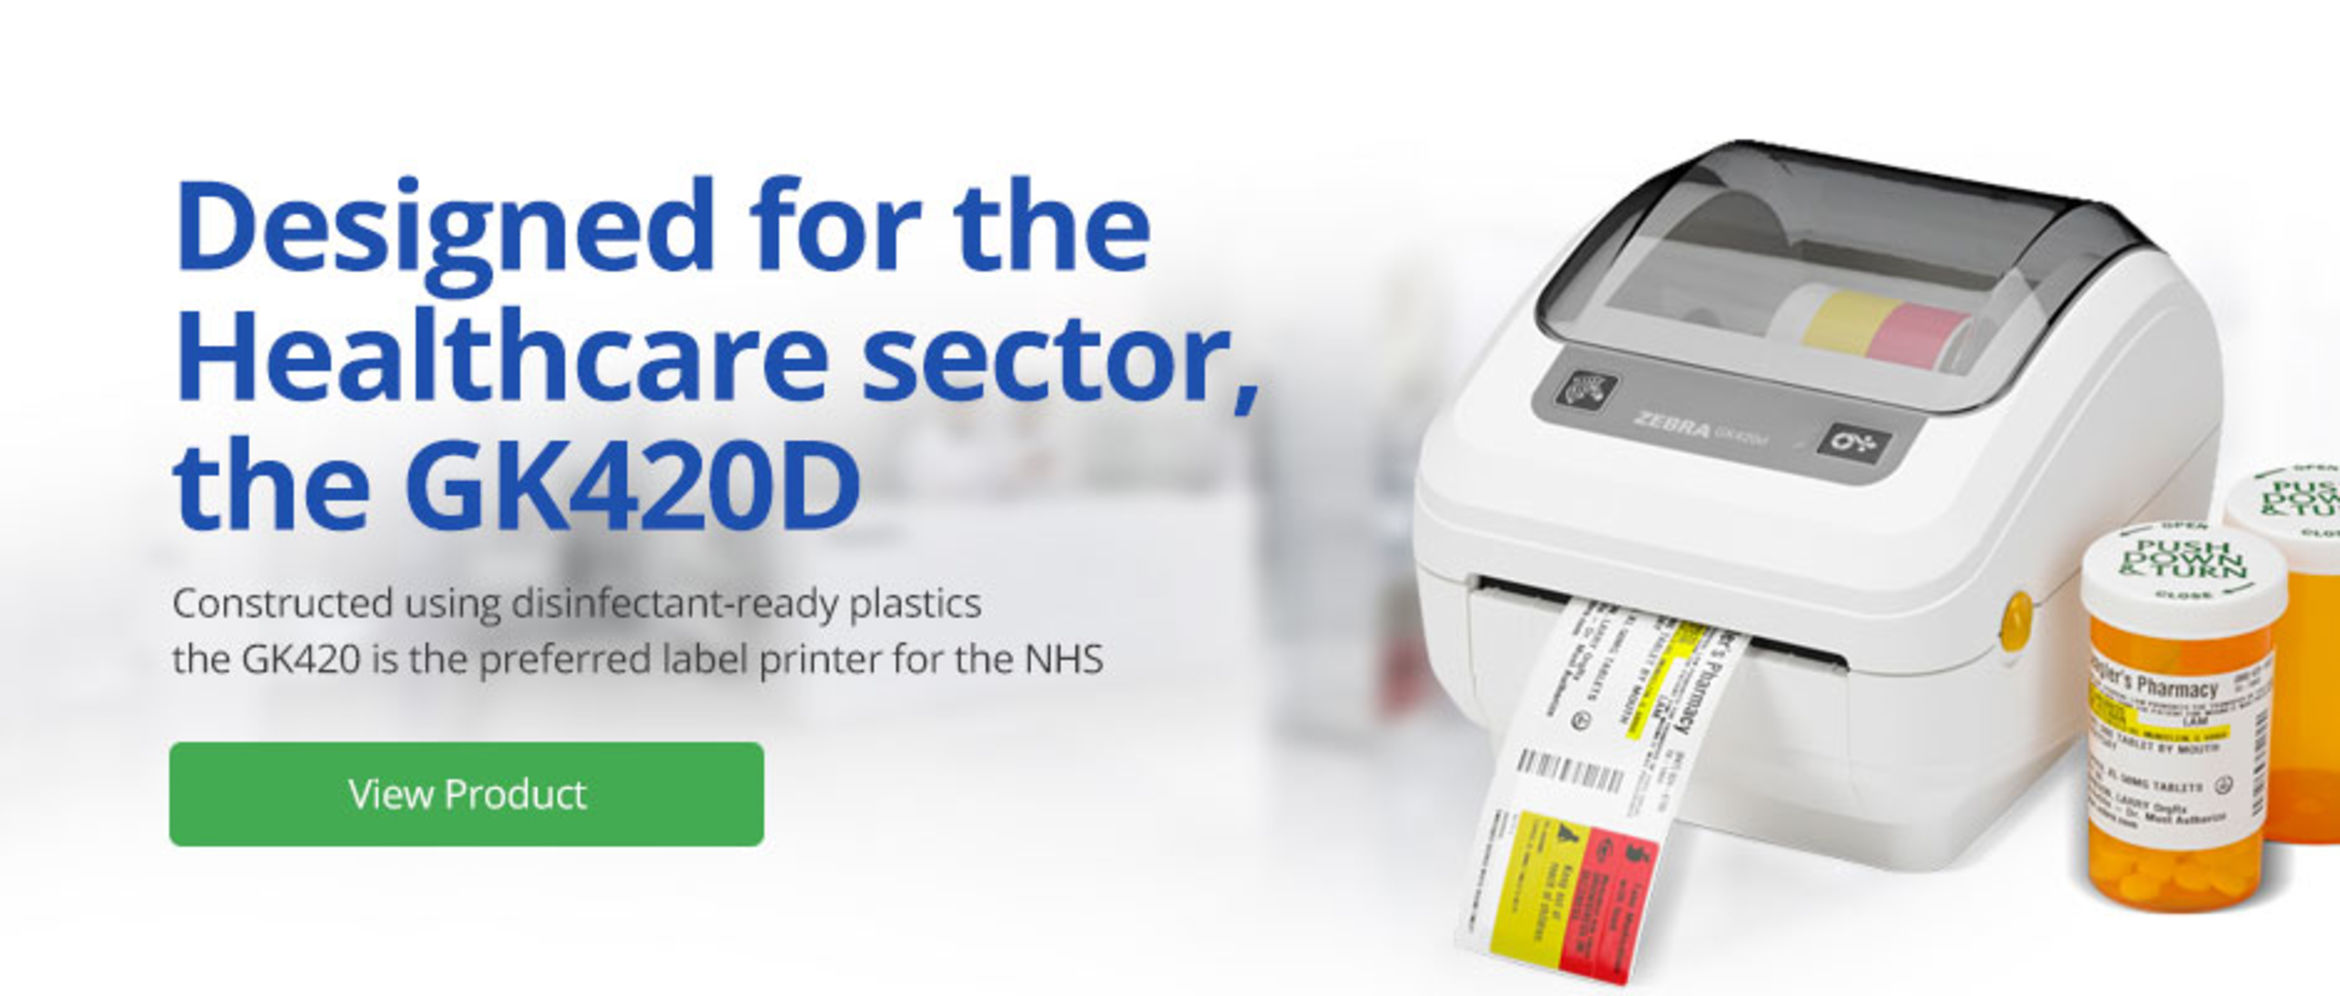 Designed for the Healthcare sector, the GK420D